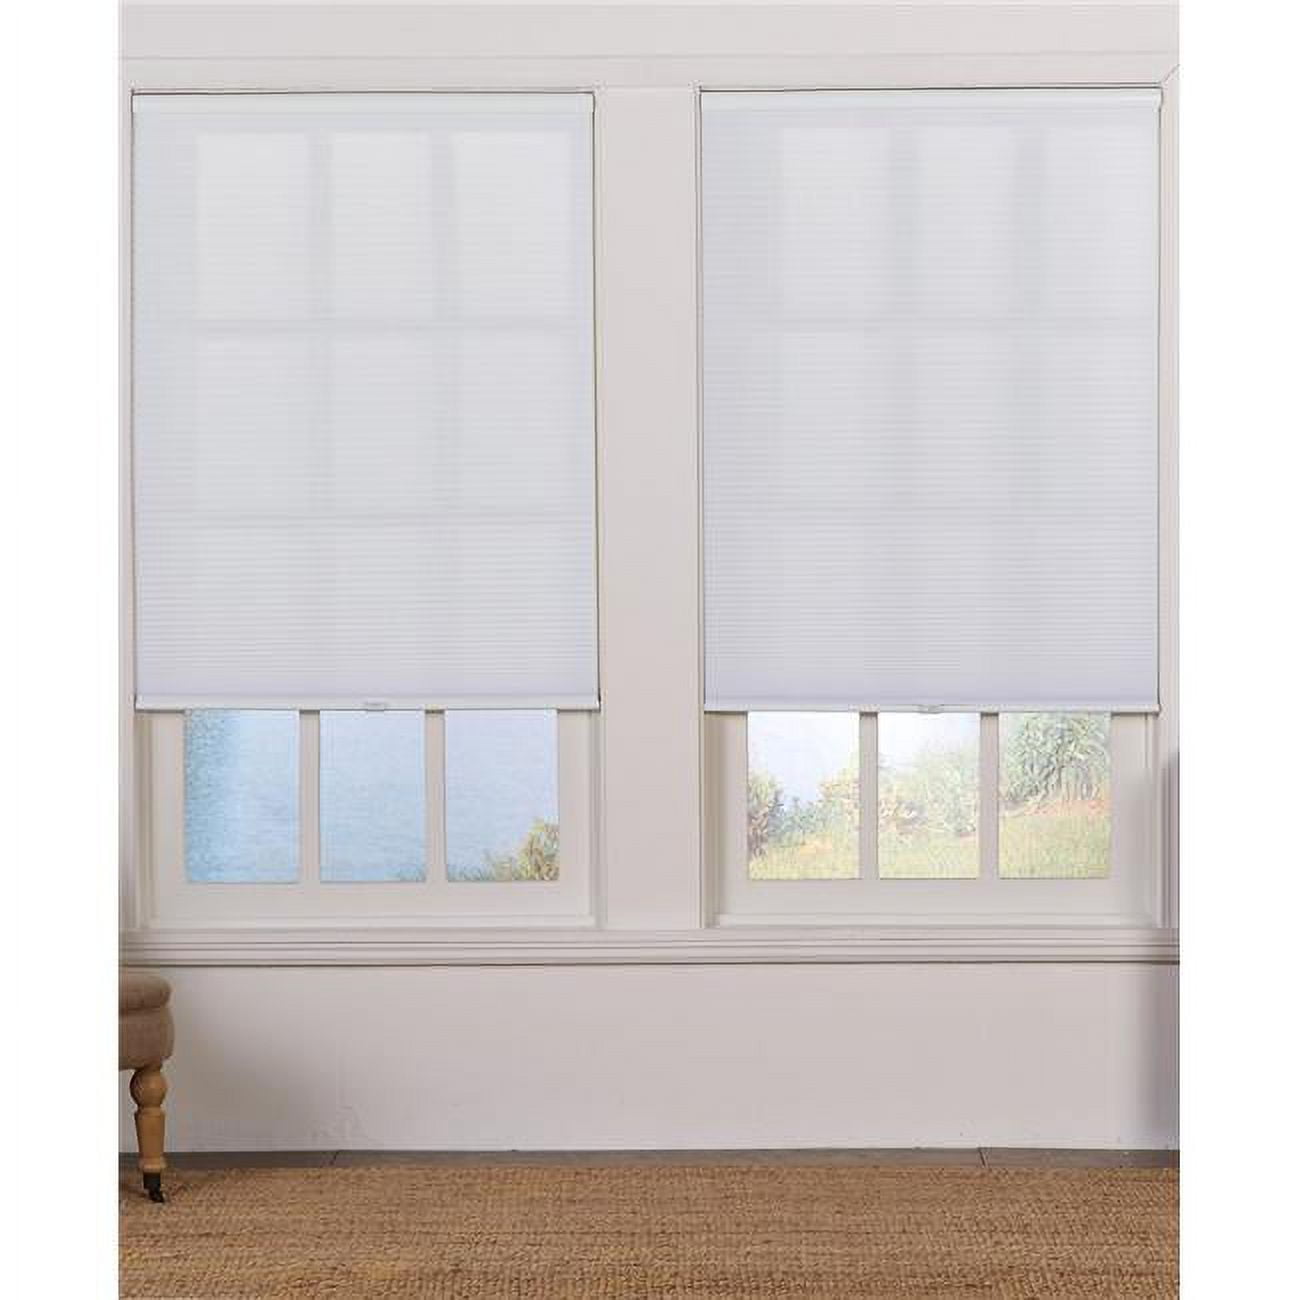 Ubc335x72wt Cordless Light Filtering Cellular Shade, White - 33.5 X 72 In.